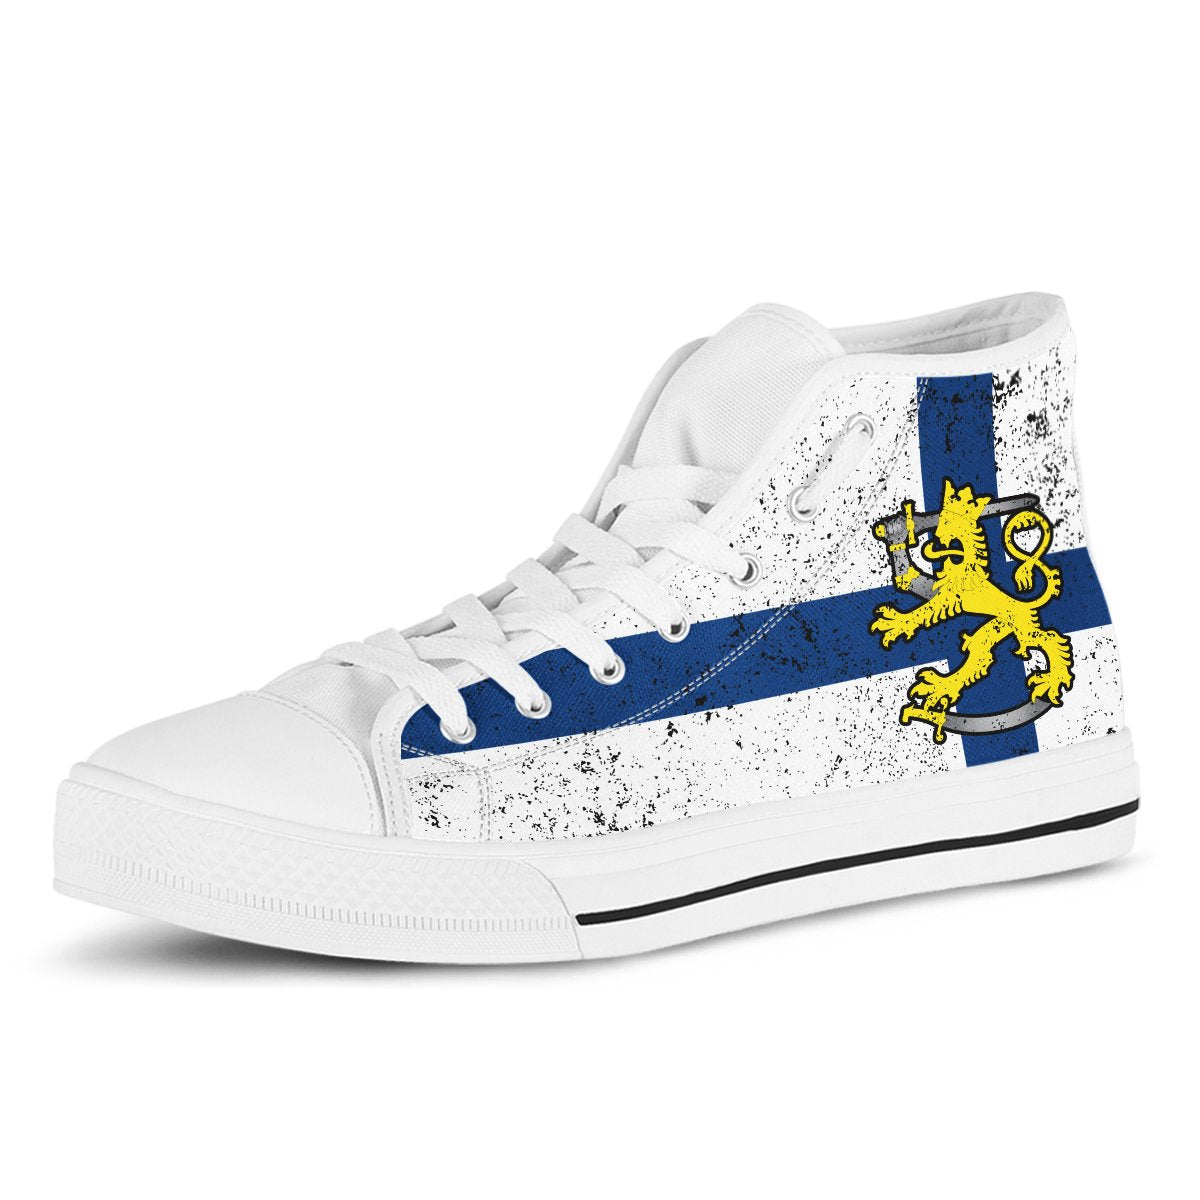 finland-suomi-high-top-canvas-shoes